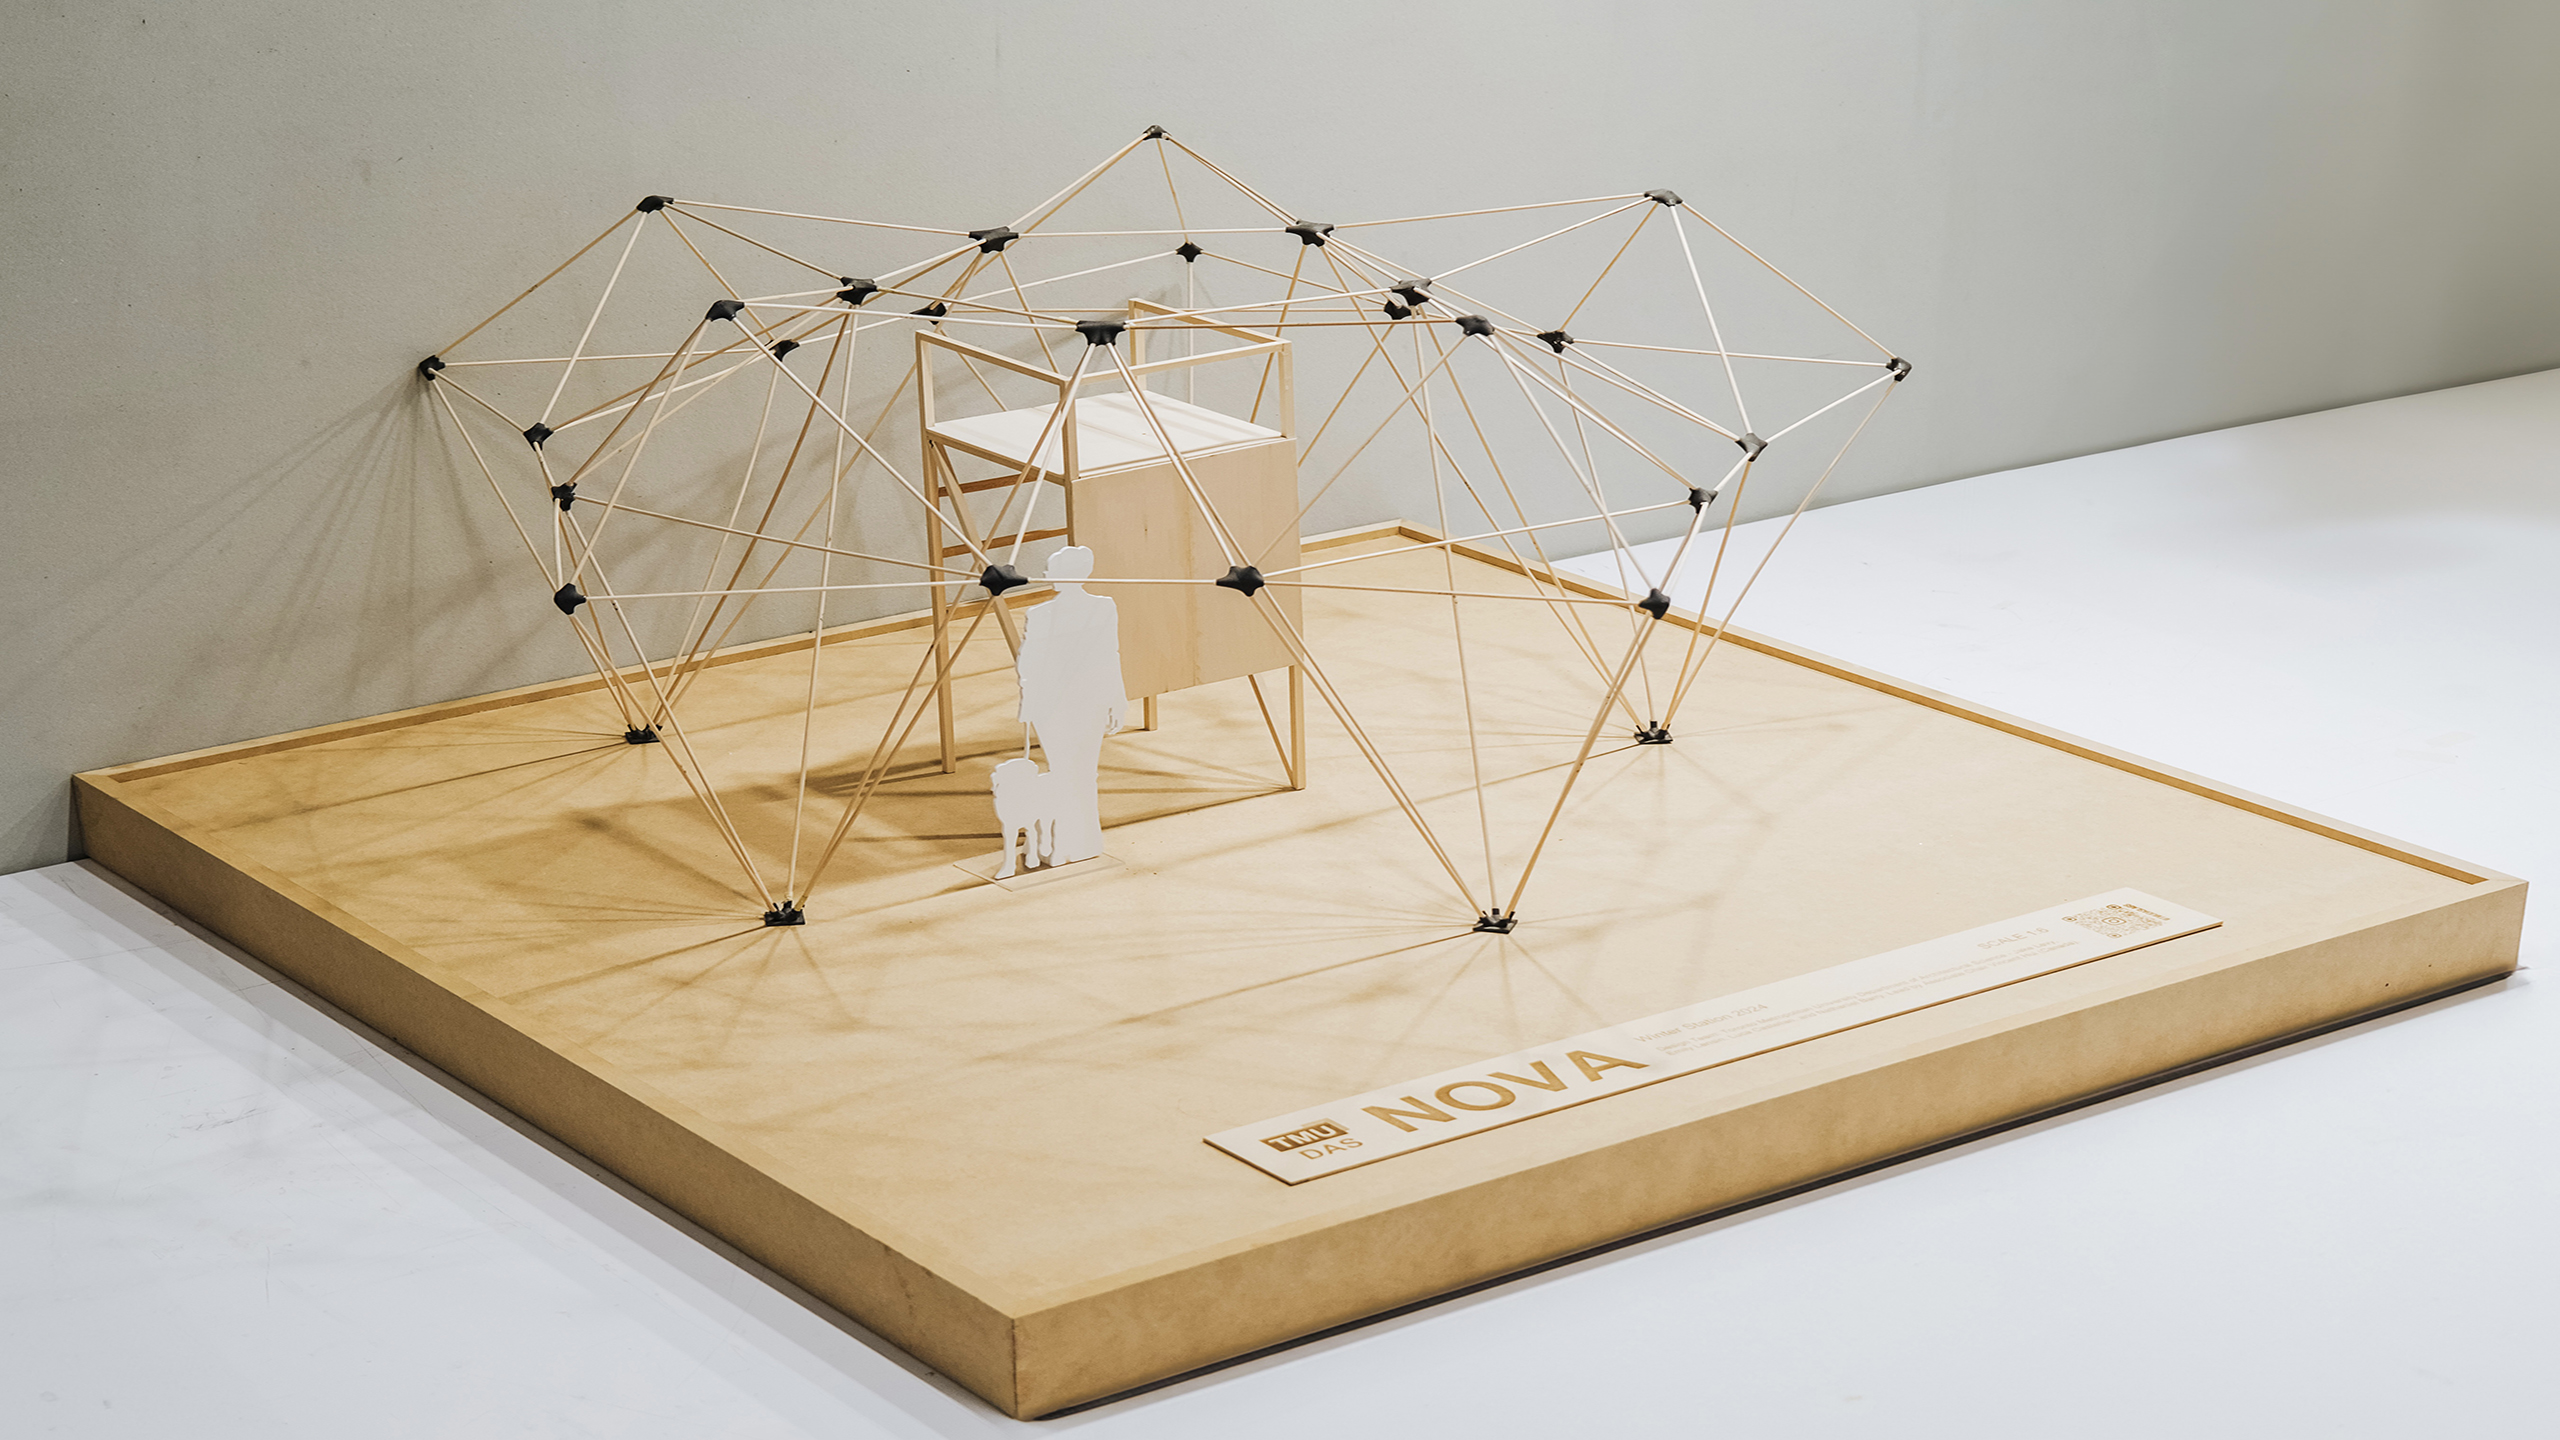 A wooden miniature scaled model of NOVA structure.